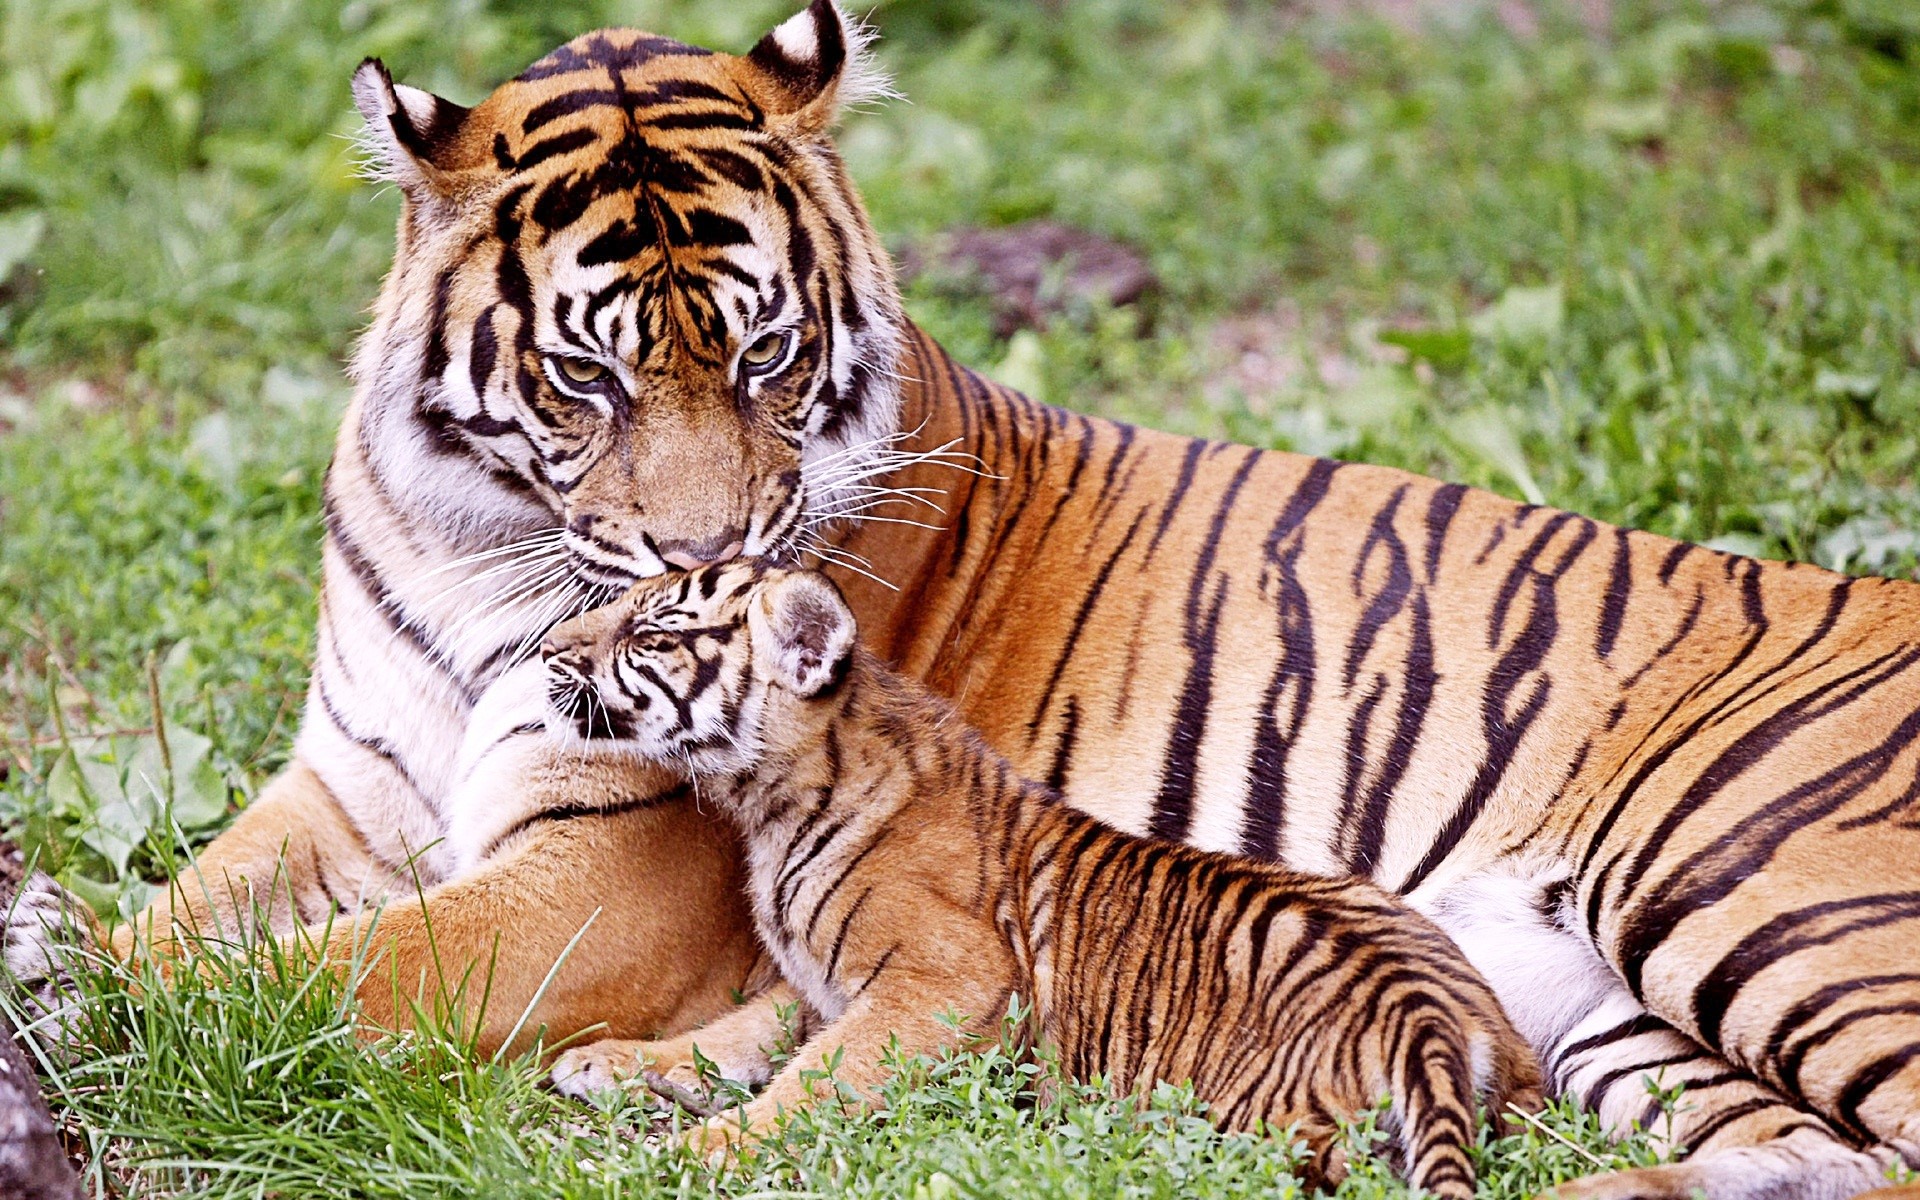 Wild Tiger Wallpapers Obtain - HD Images New